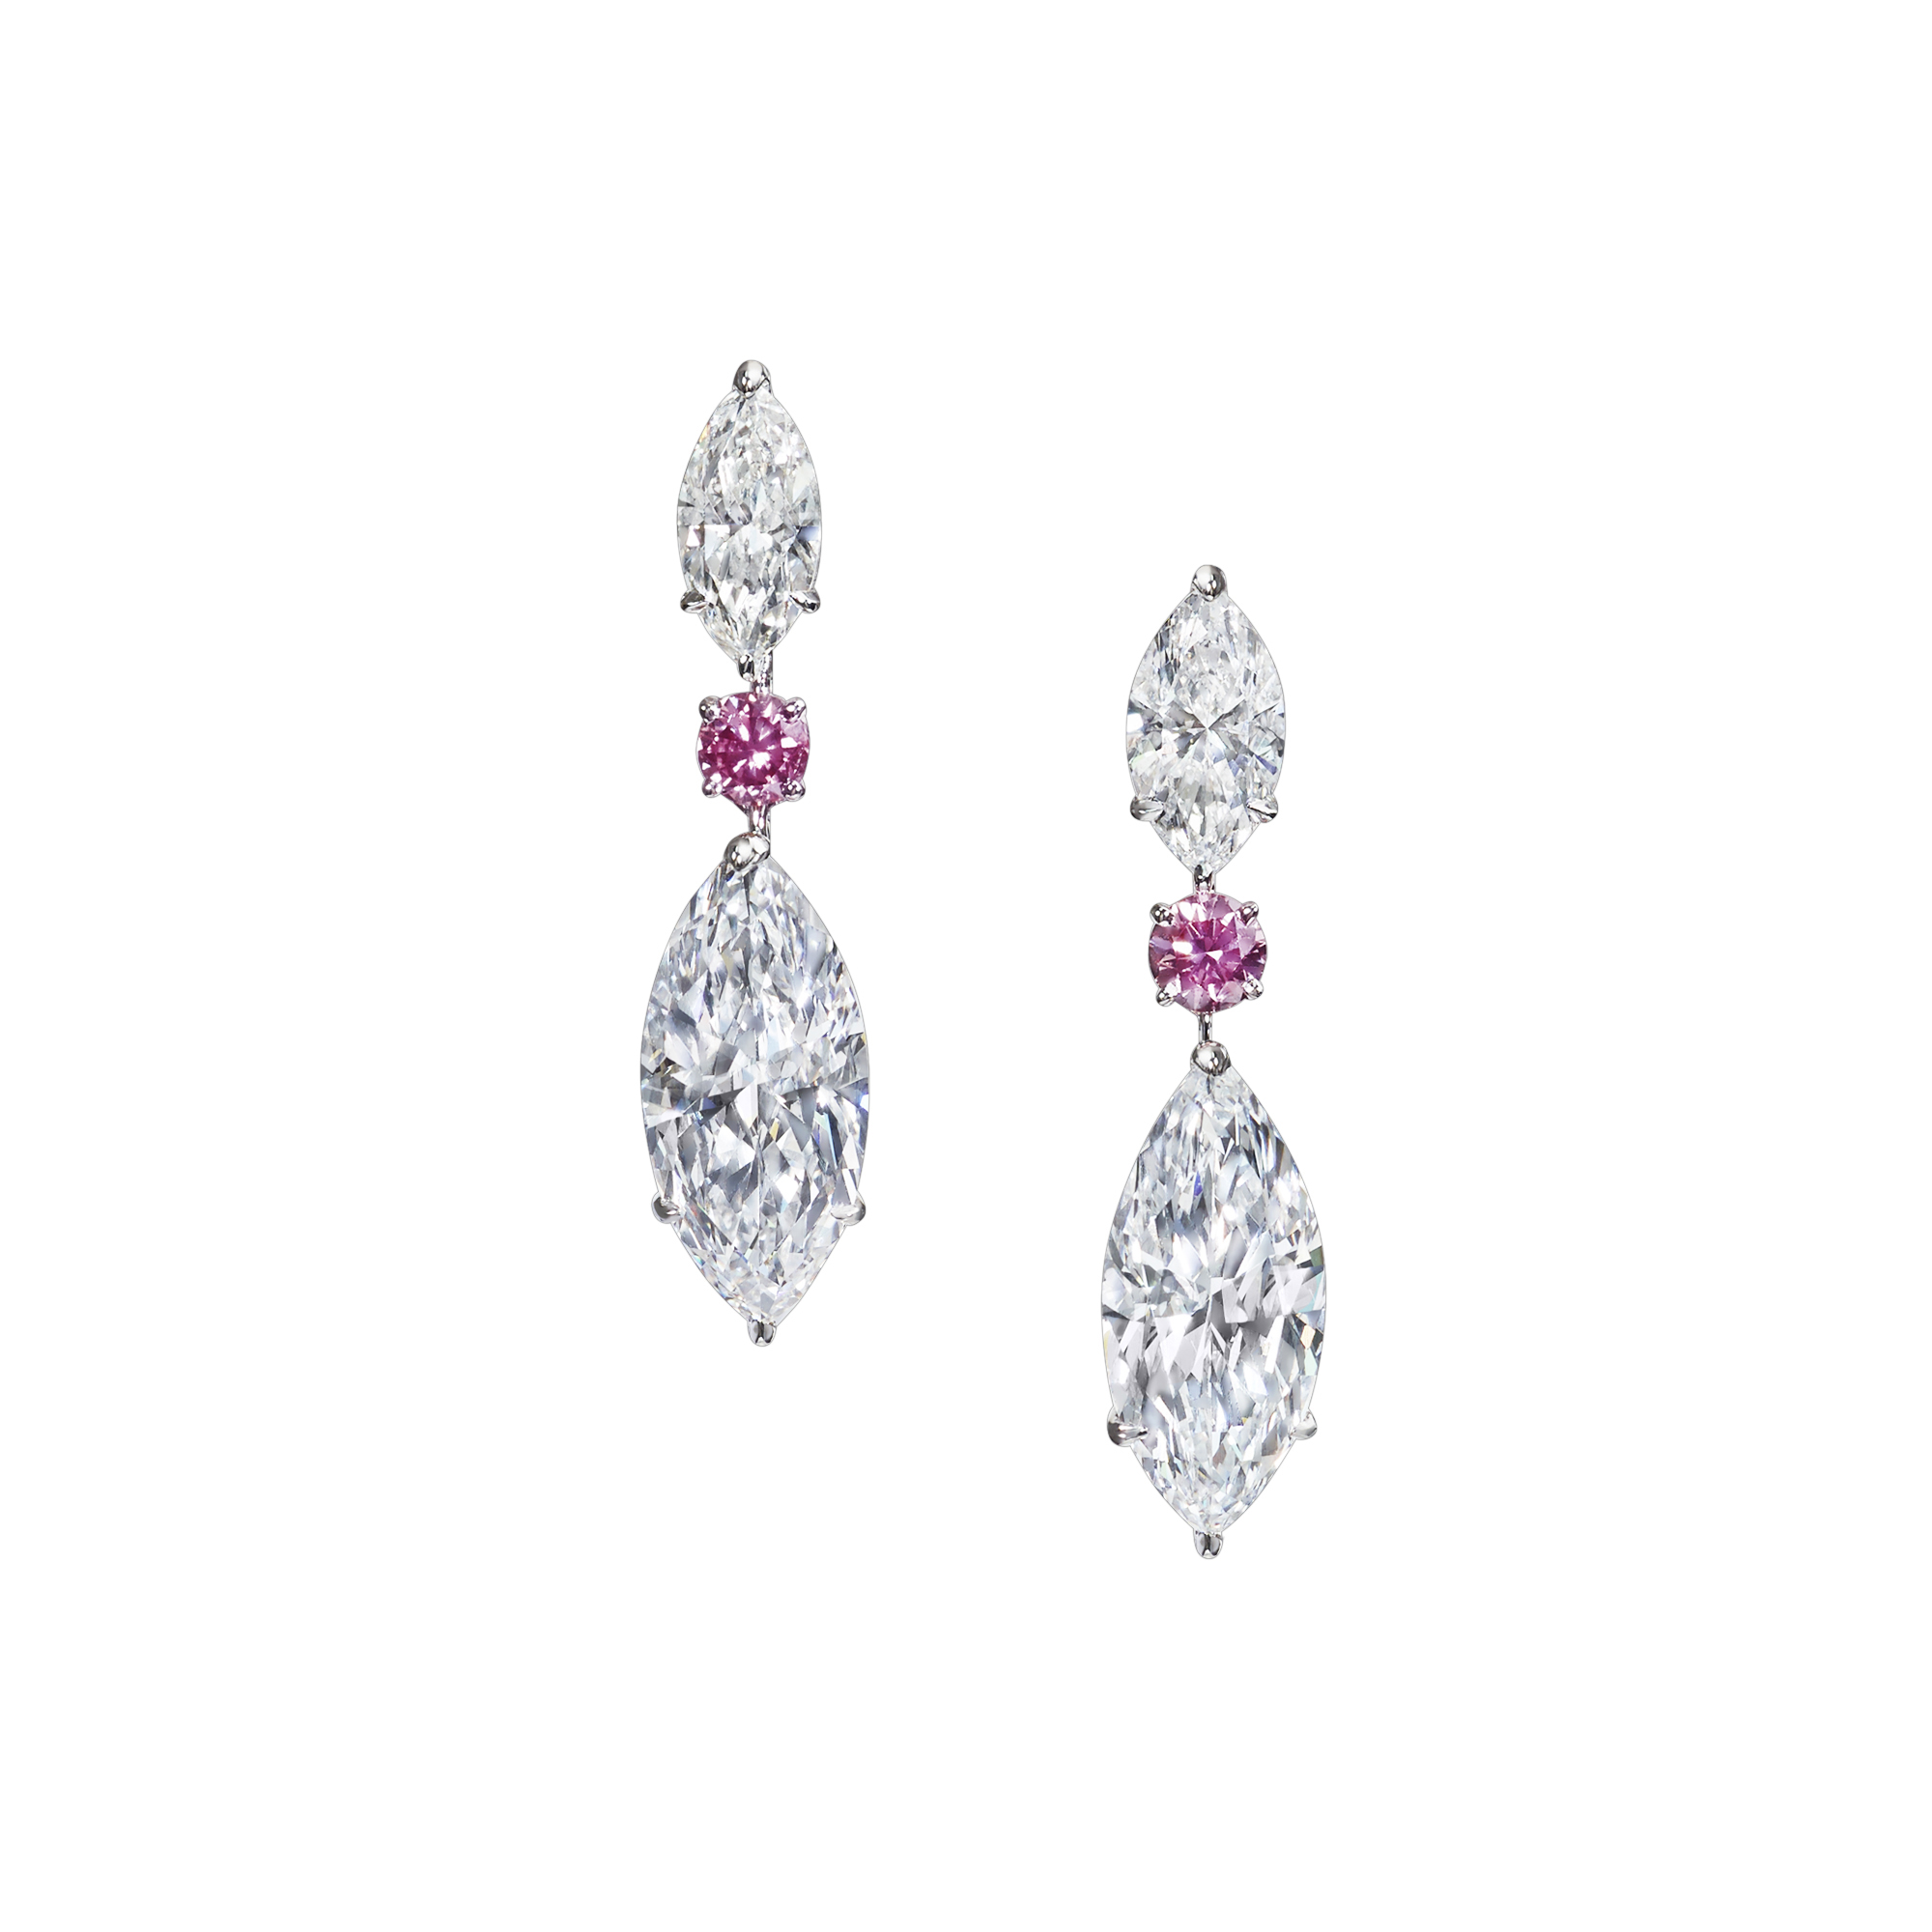 White and Pink Diamond Earrings - Moussaieff | Moussaieff